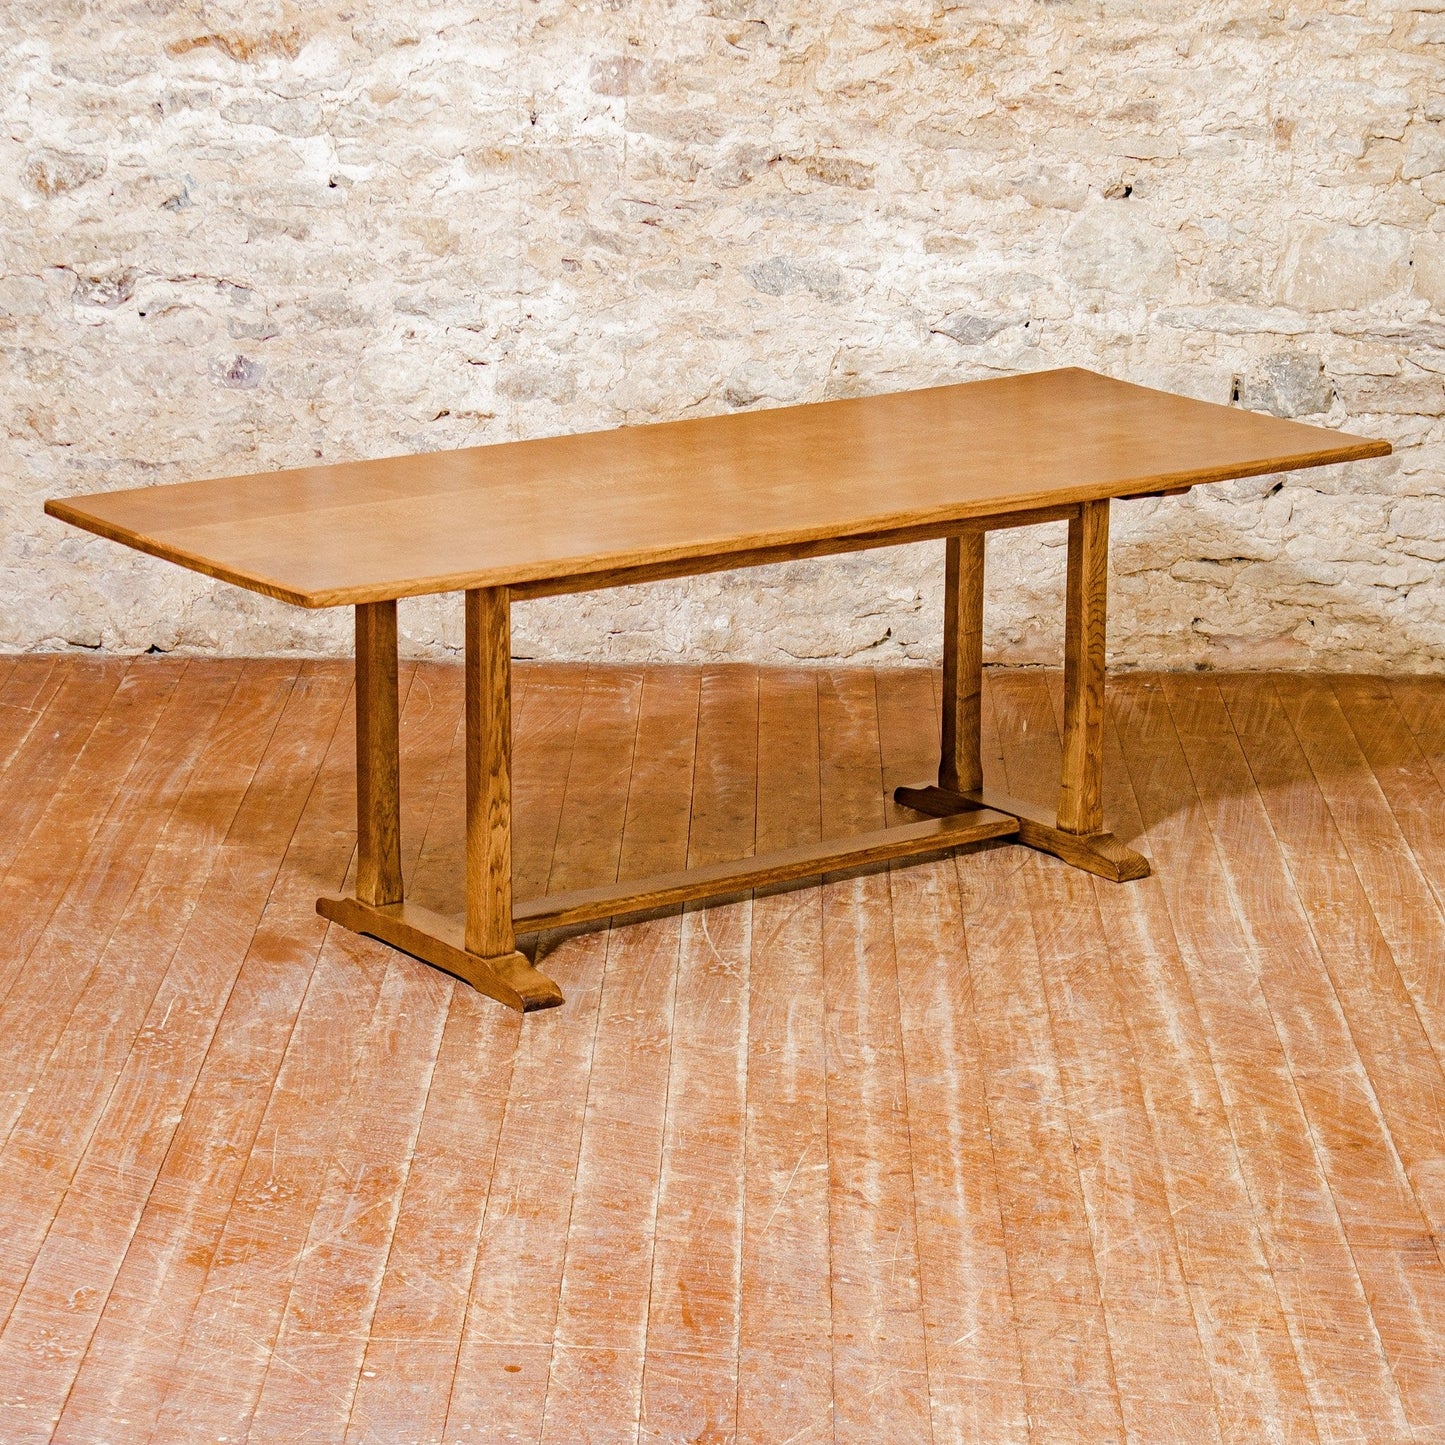 Reynolds of Ludlow Arts & Crafts Cotswold School English Oak Dining Table c 1950